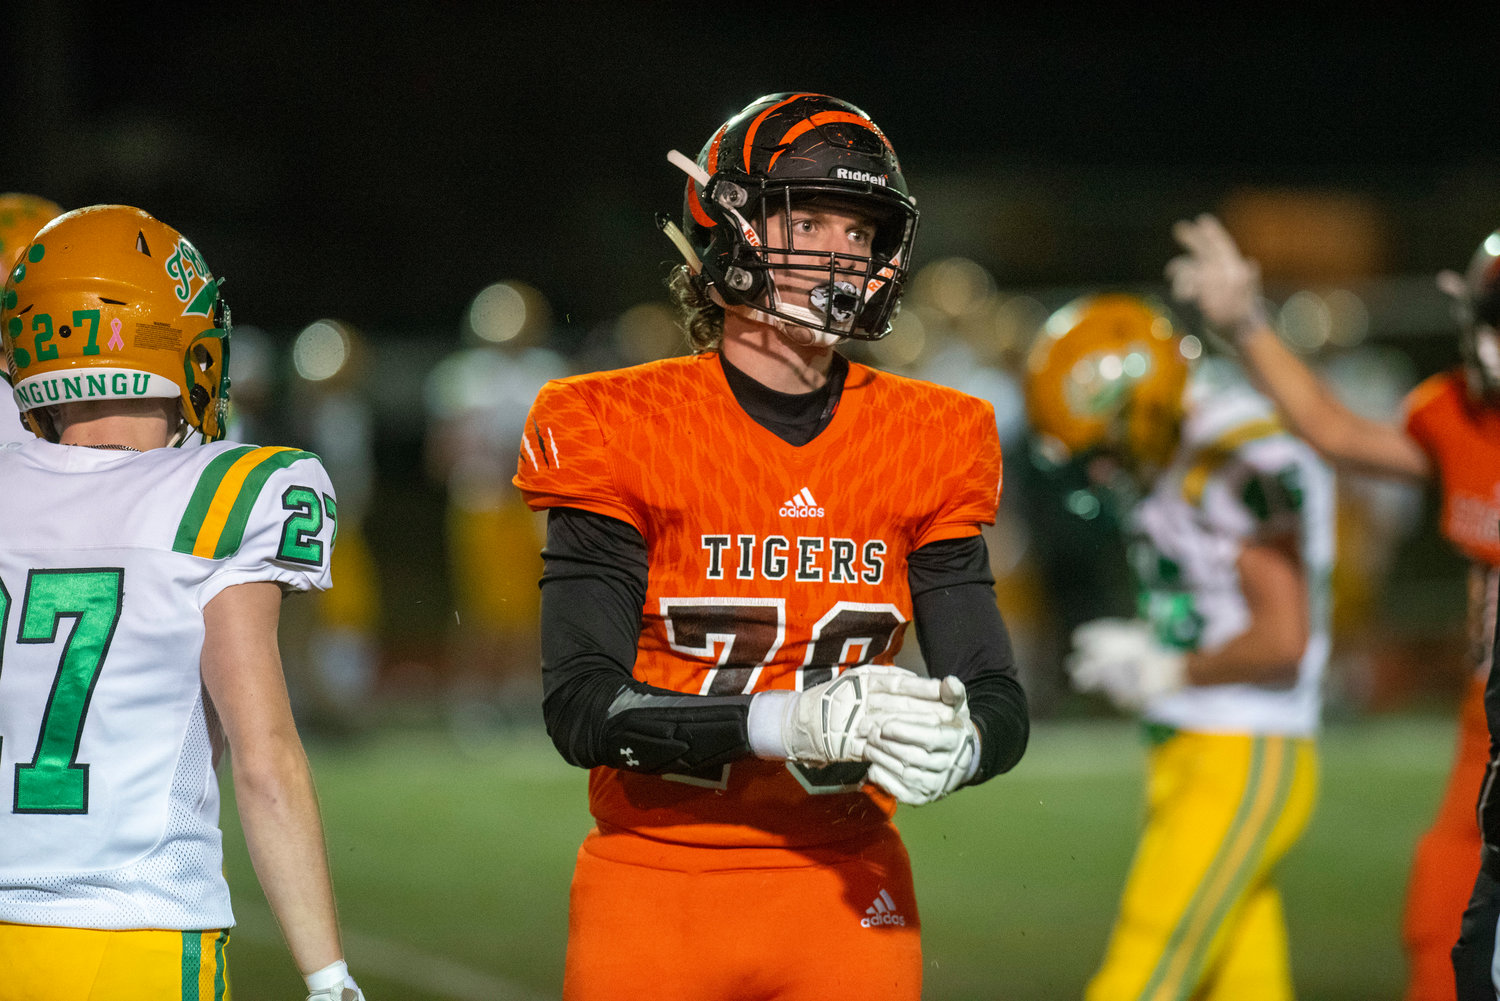 Centralia’s Colton Aitken (70) looks toward the Tigers’ sideline after making a tackle against Tumwater Oct. 29.